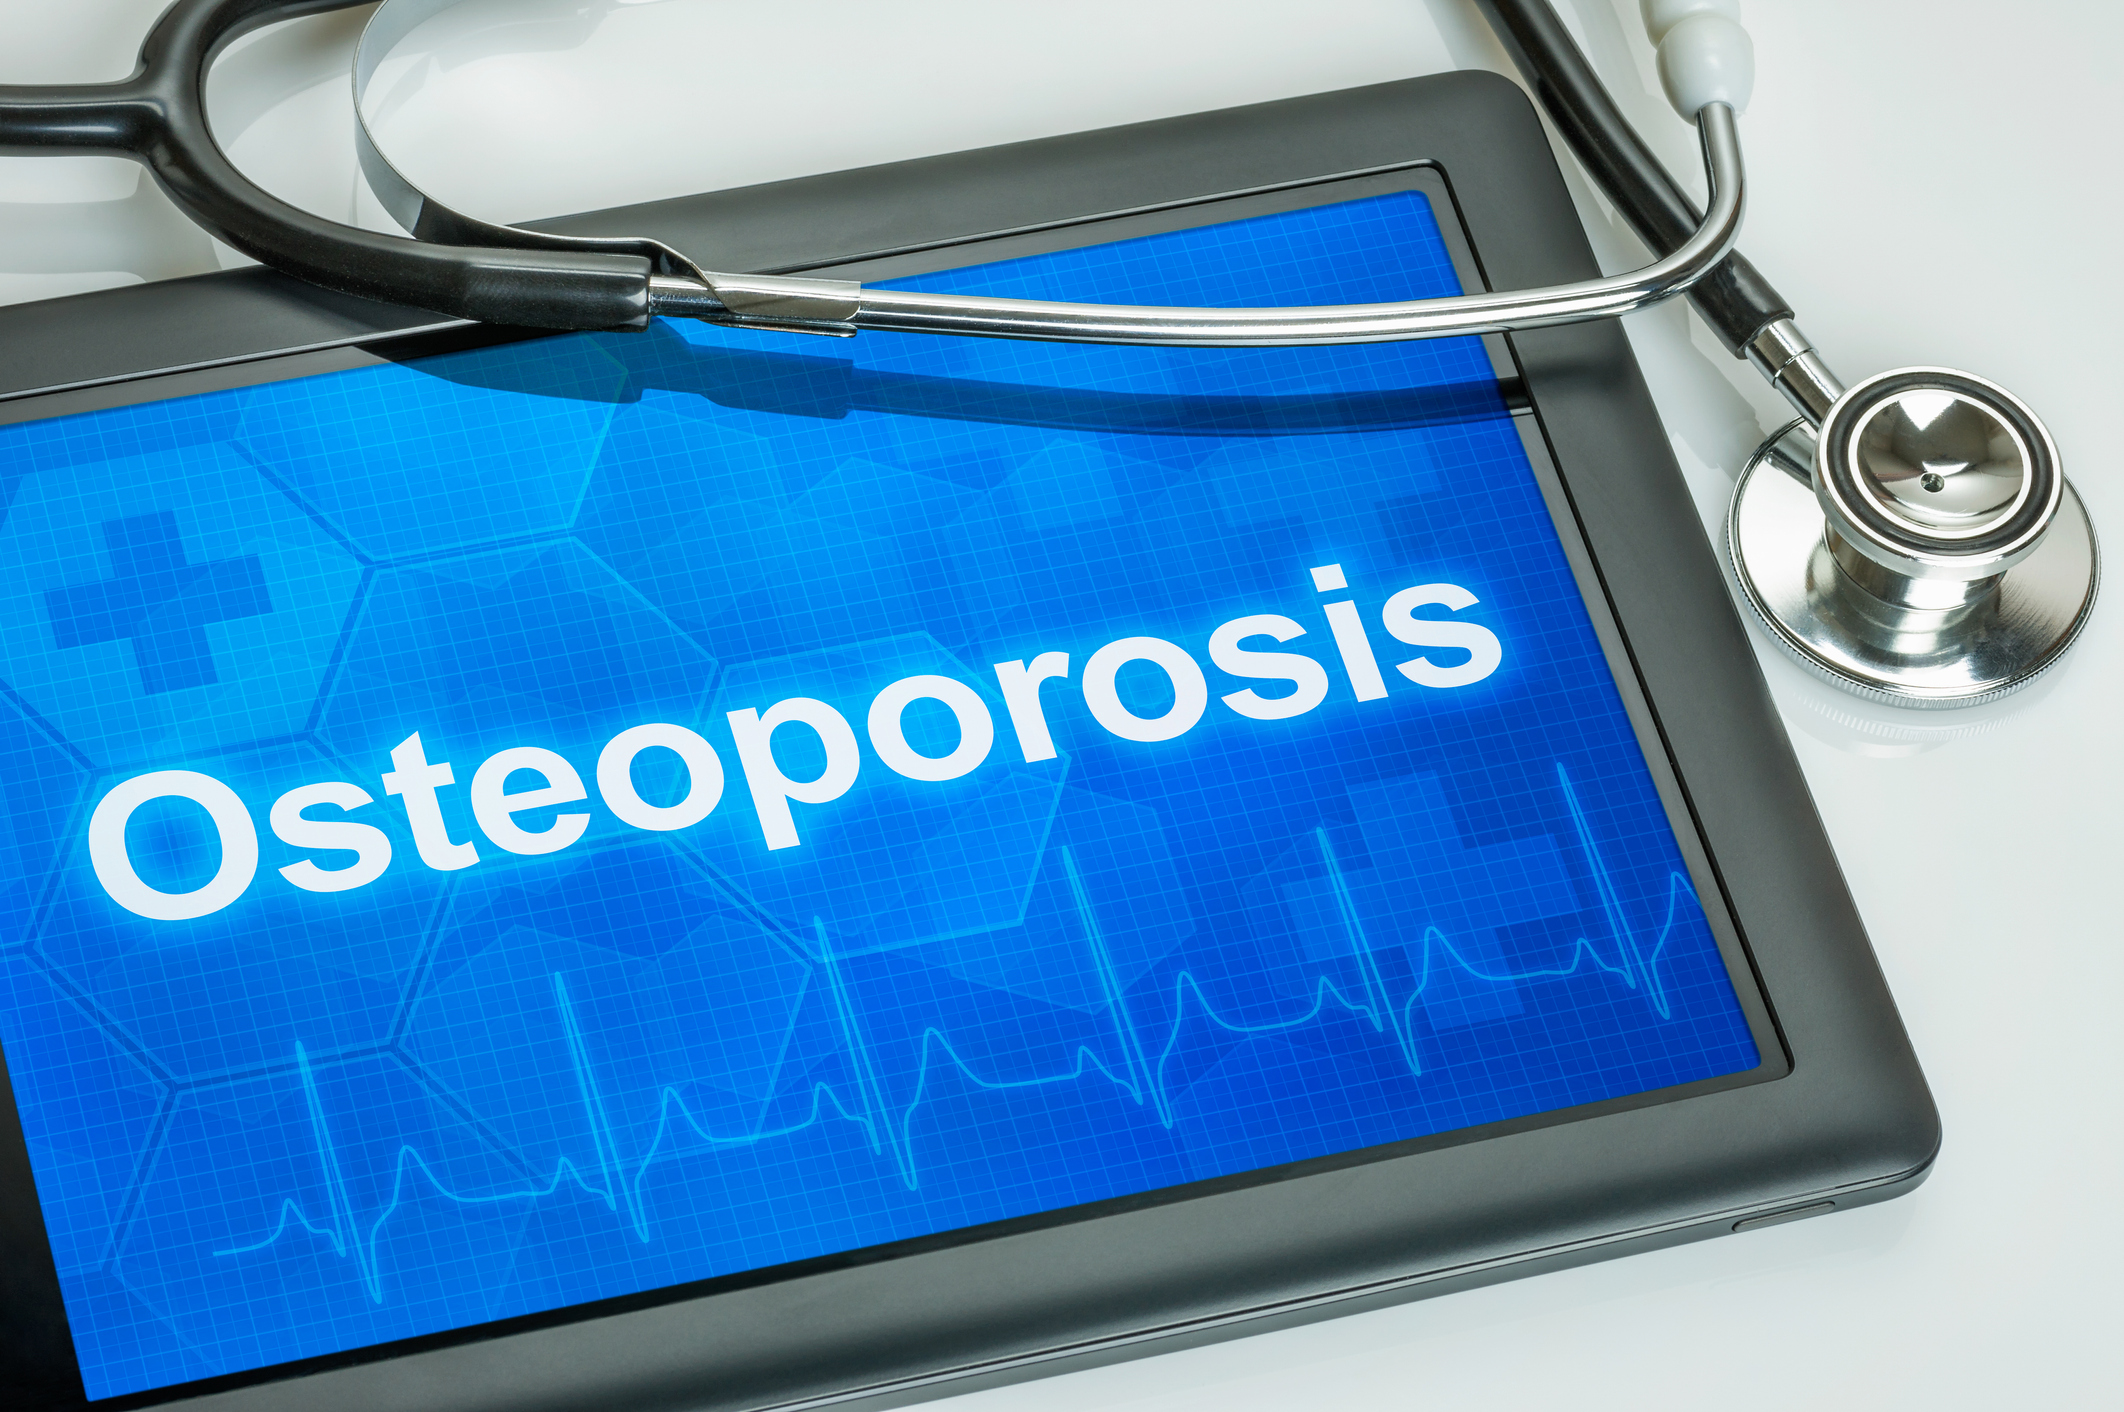 Who Should Get Tested for Osteoporosis?